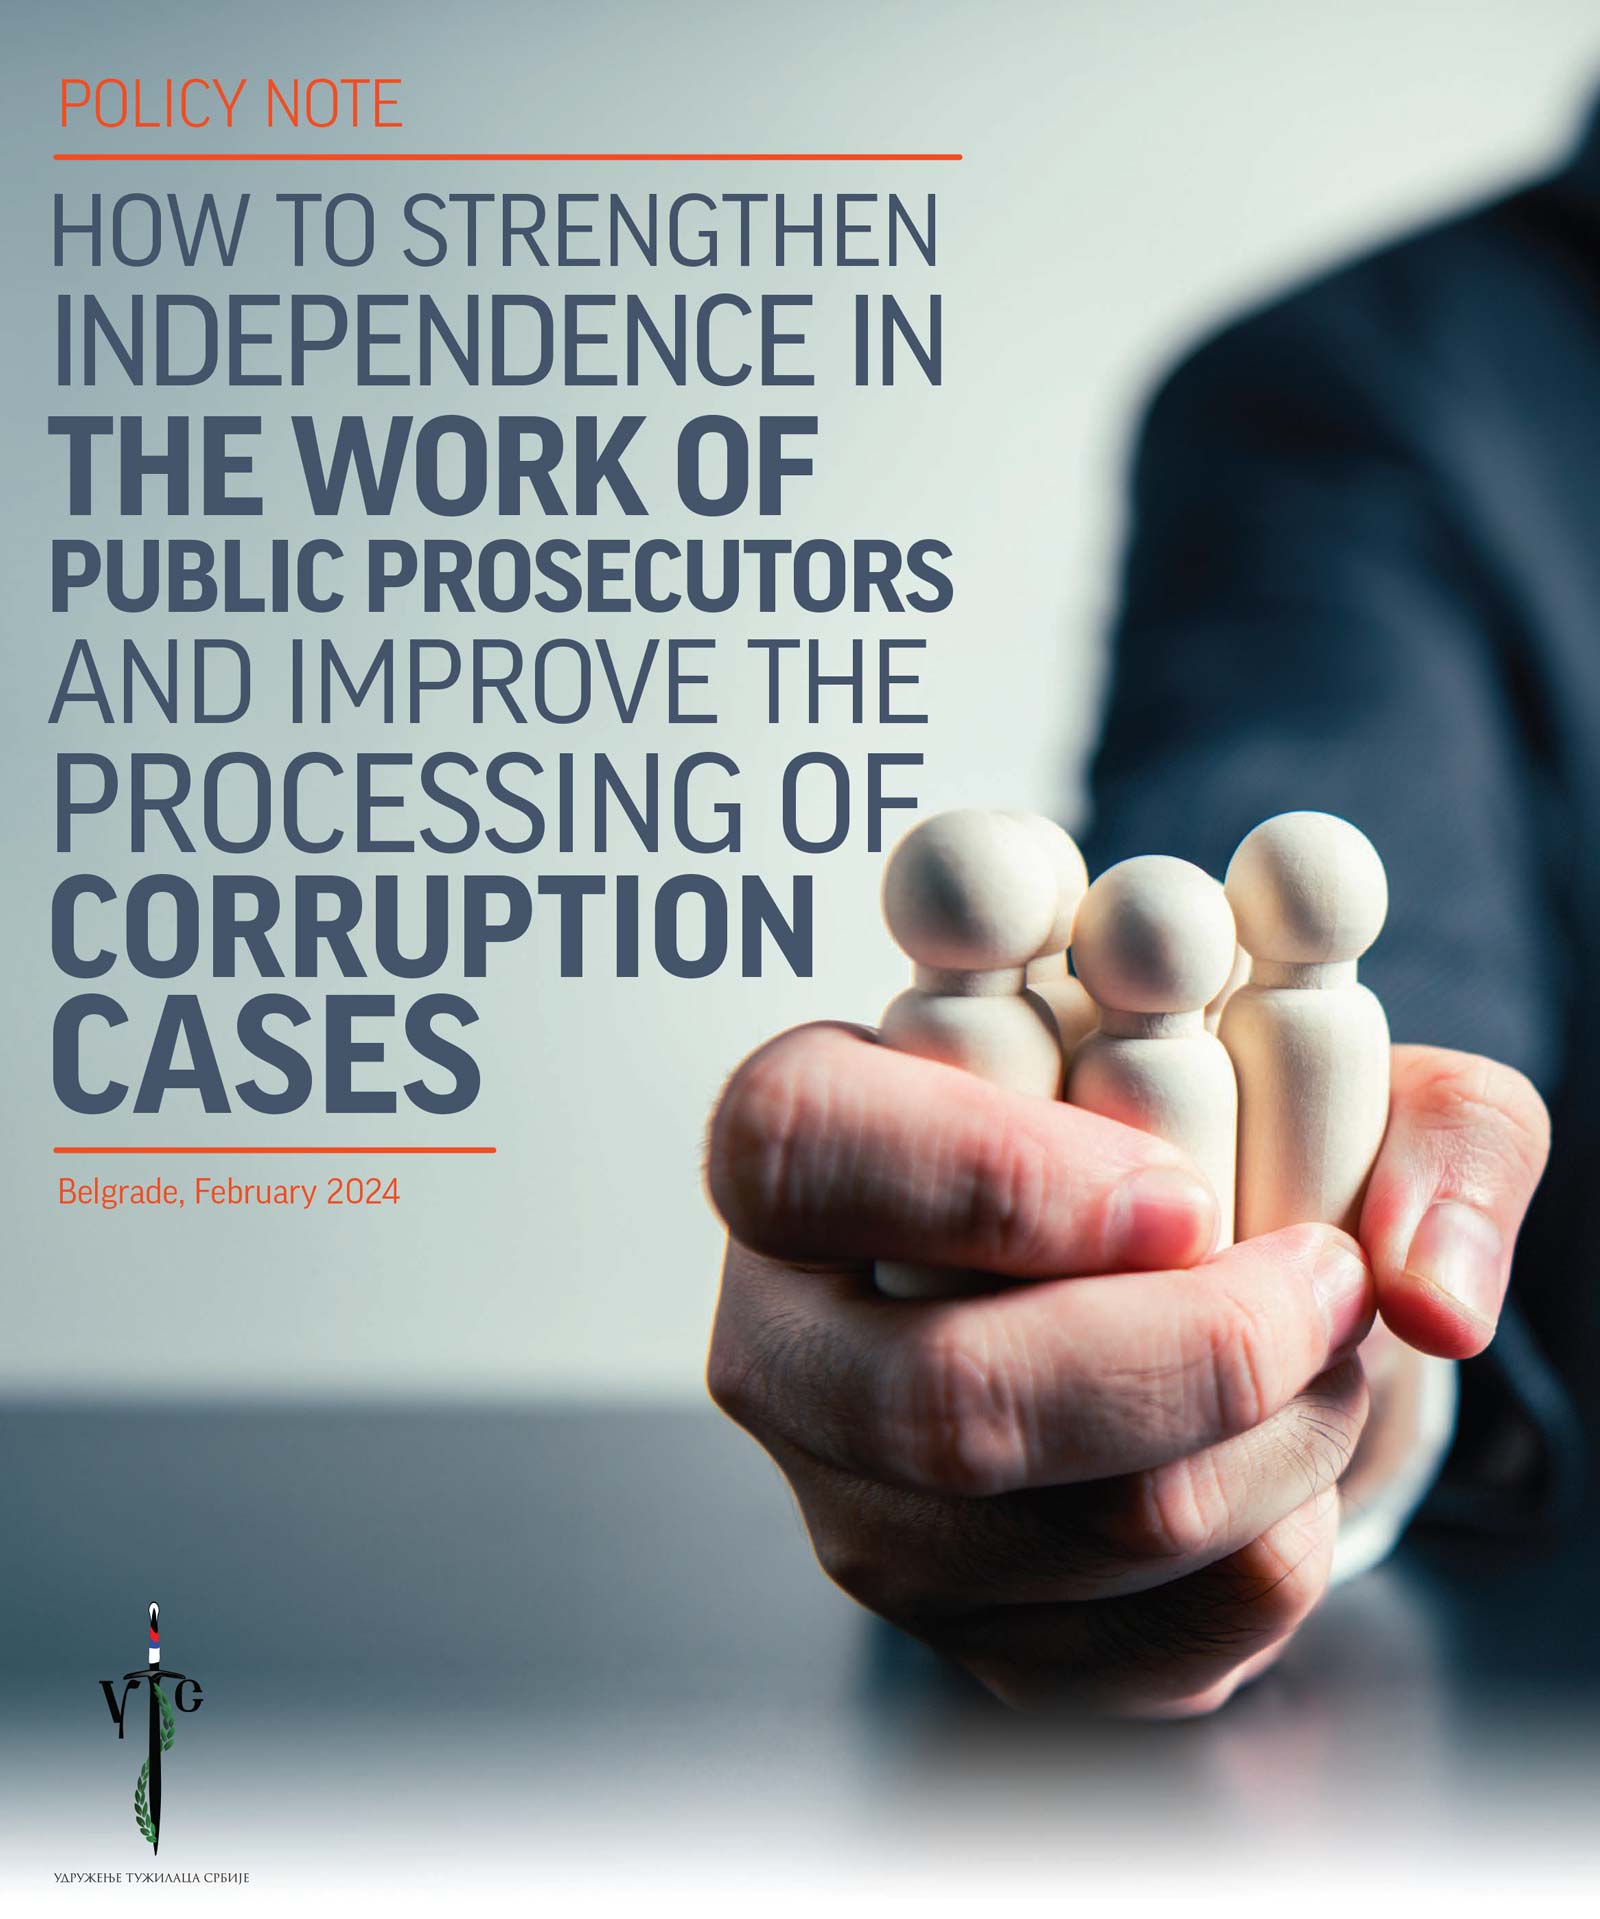 How to strengthen independence in the work of Public Prosecutors and improve the processing of corruption cases